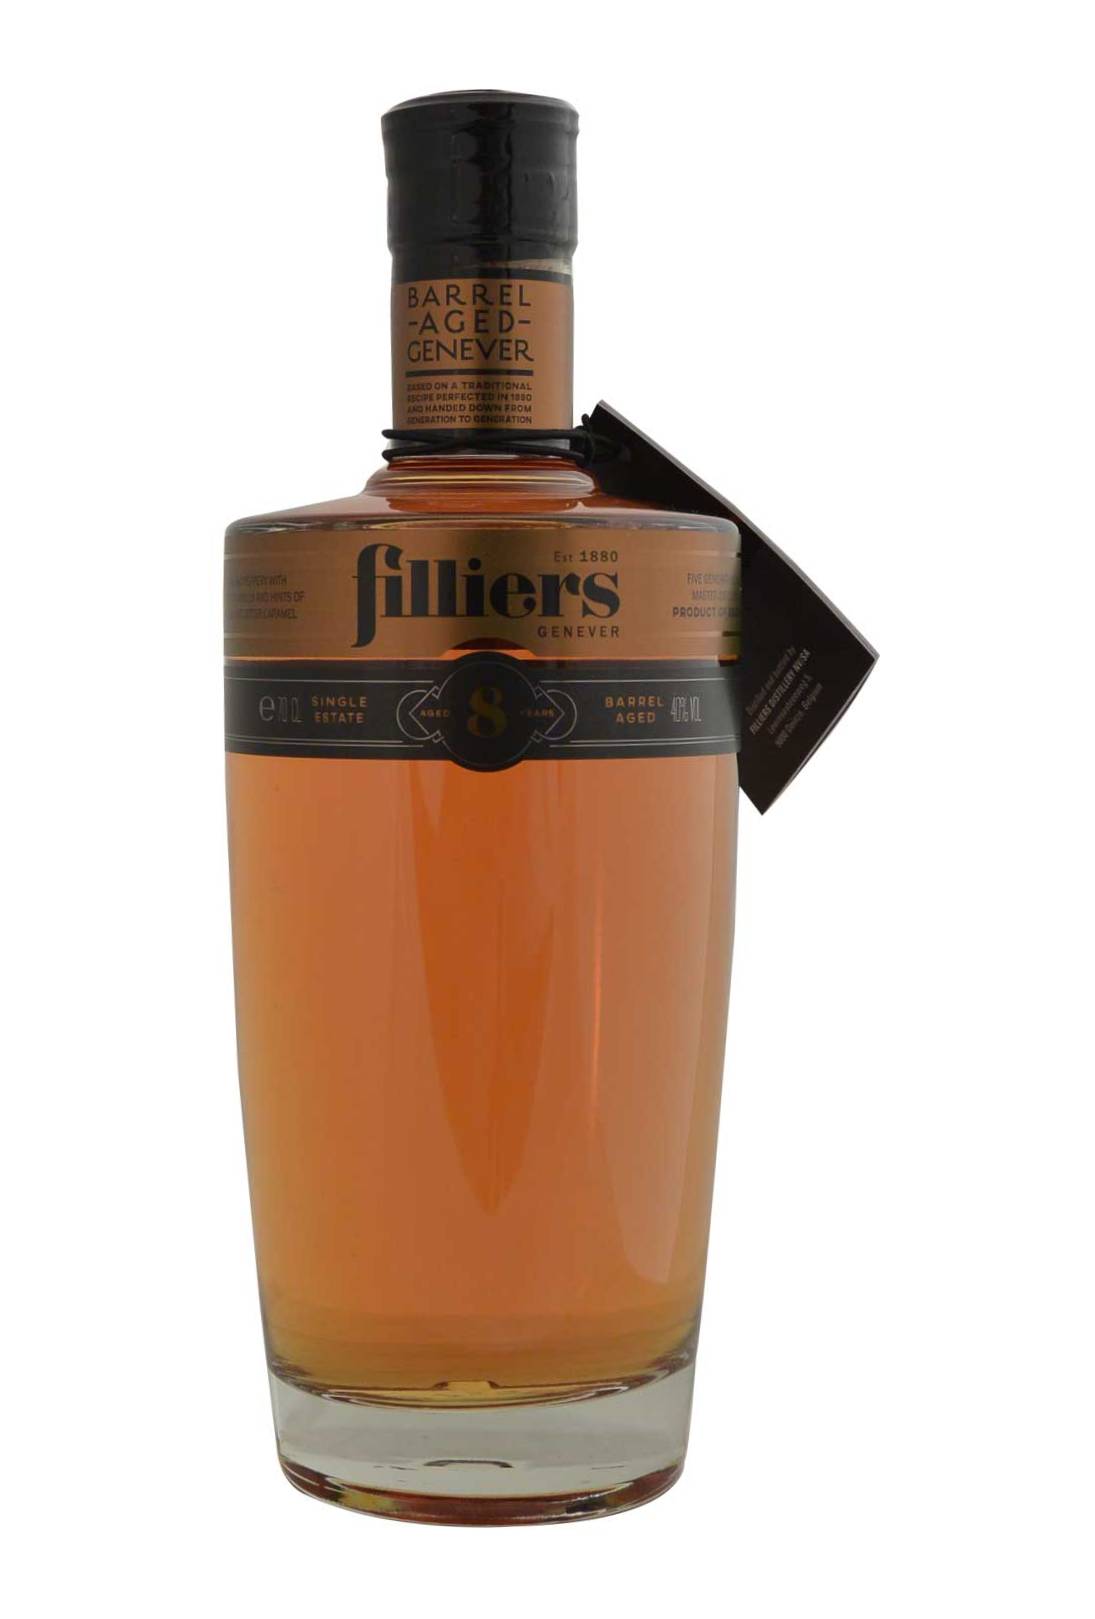 Filliers 8 Year Old Genever